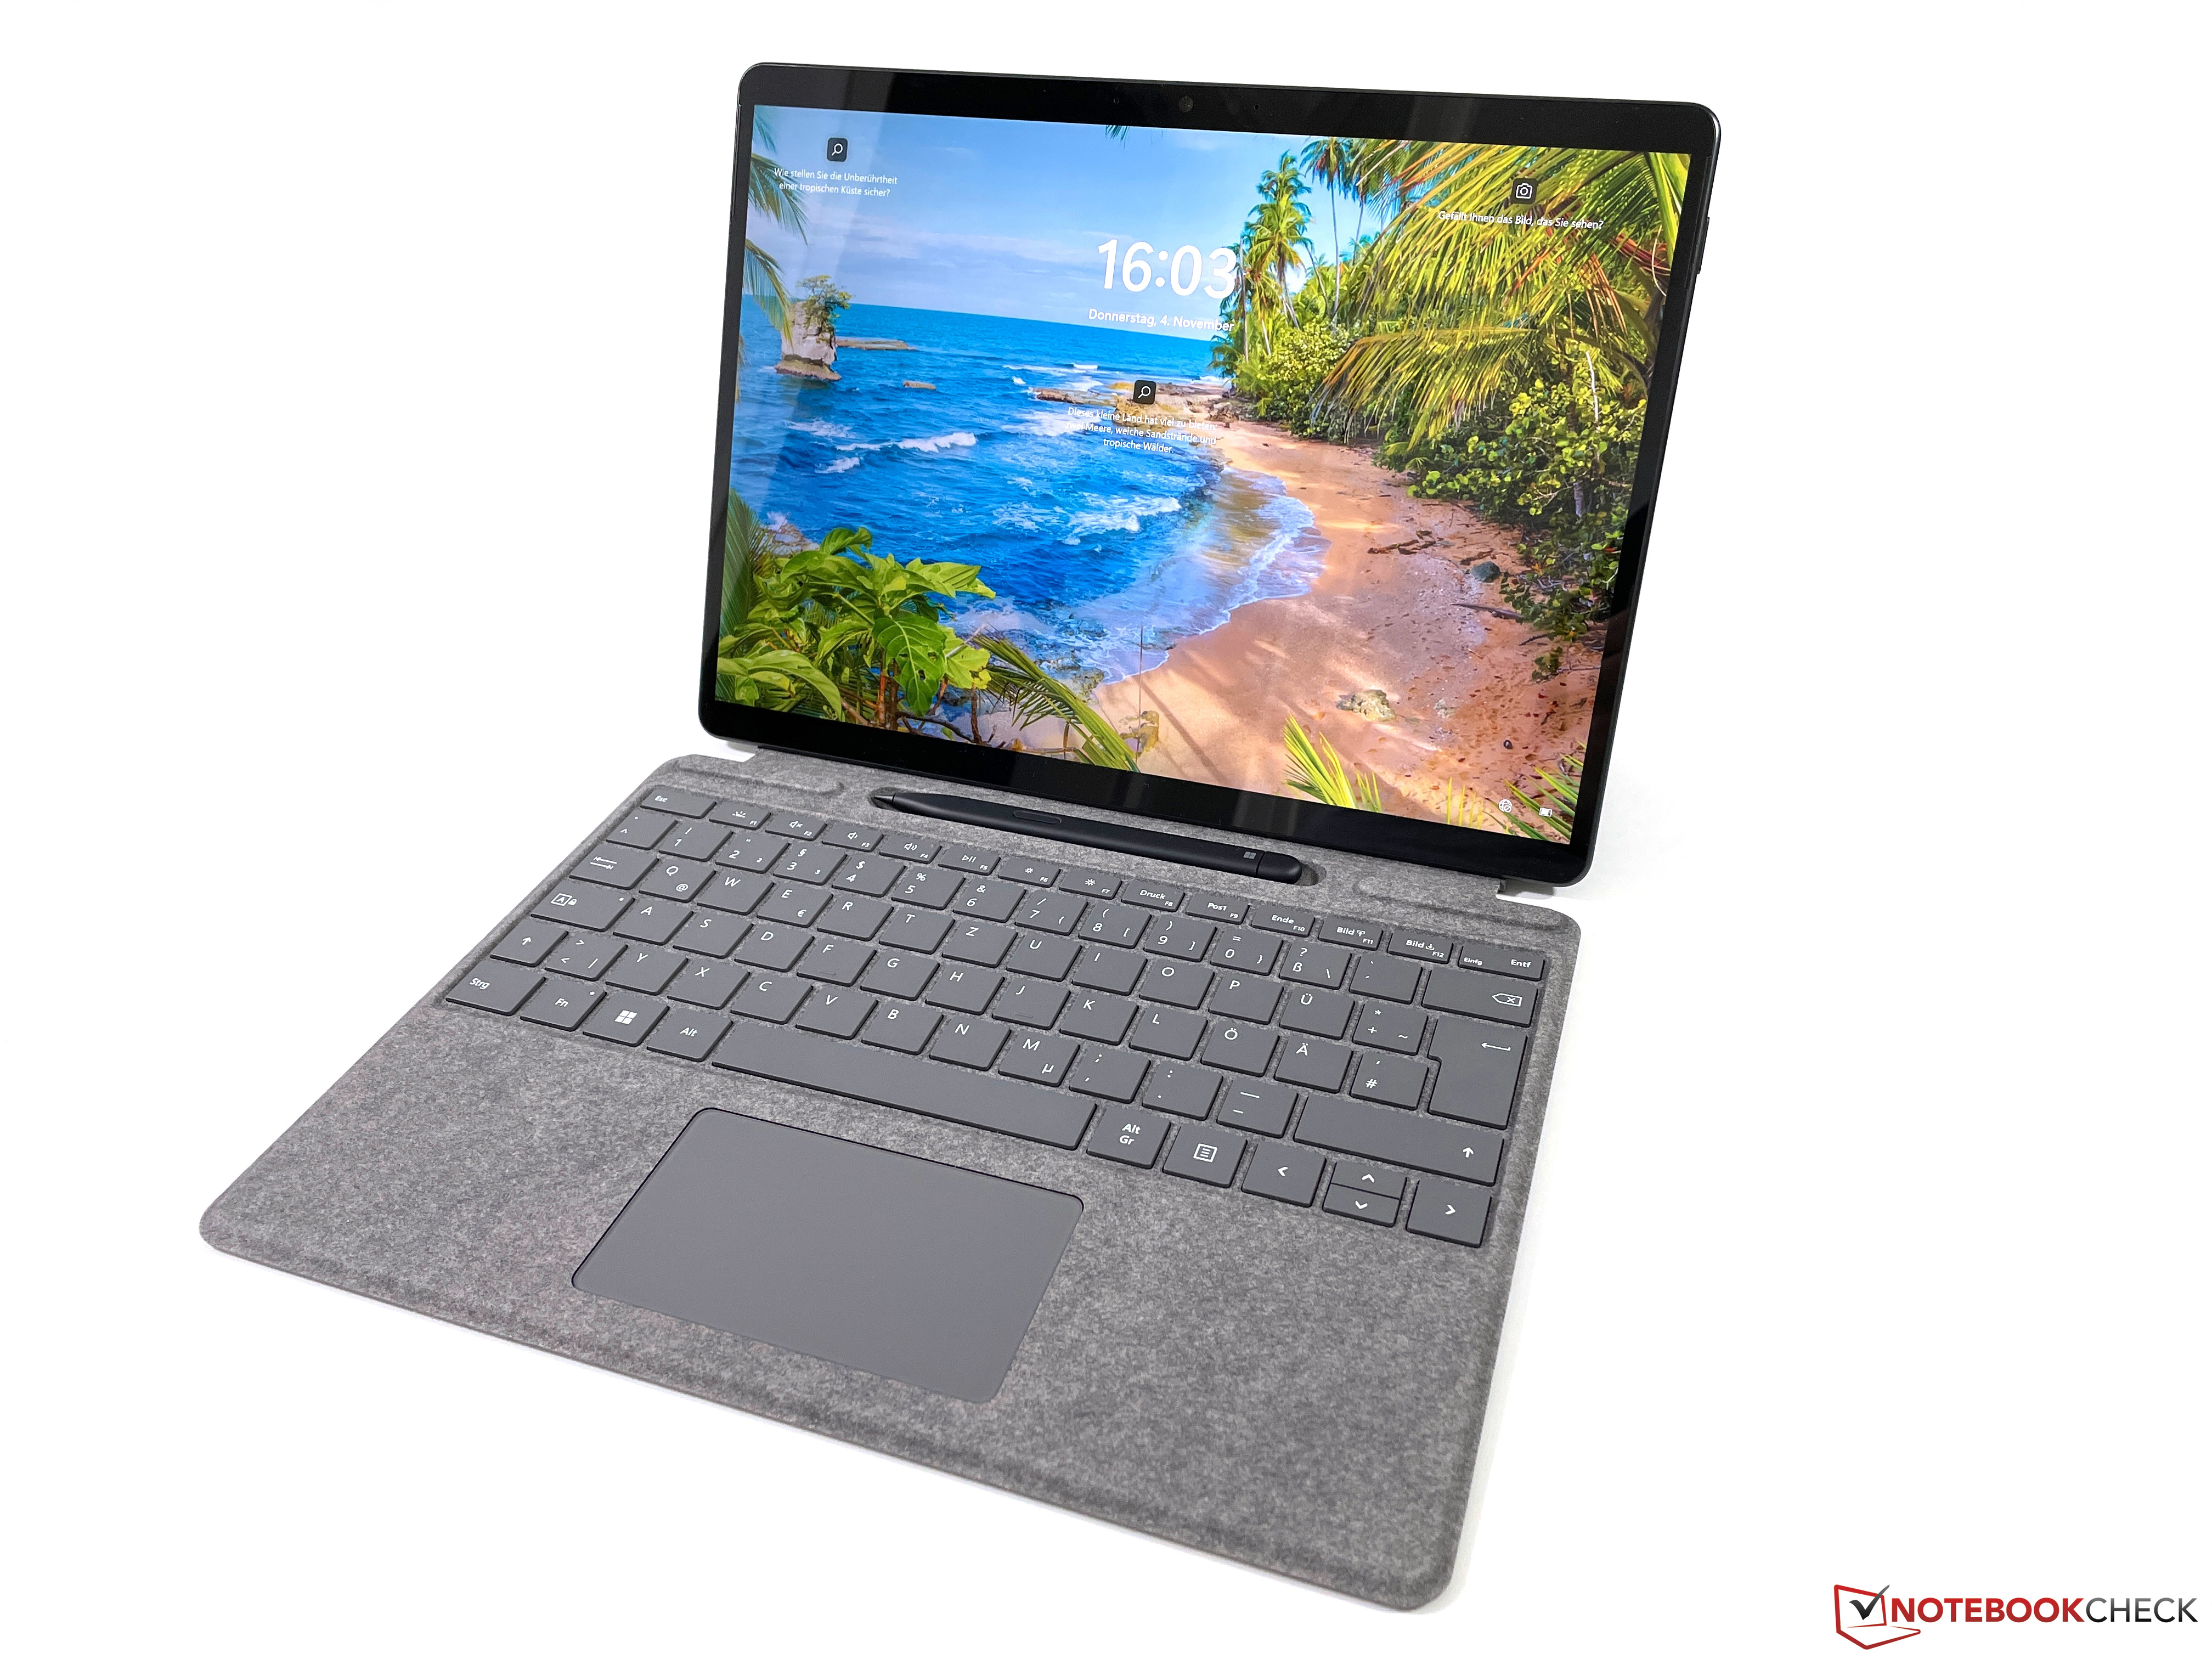 Microsoft Surface Convertible NotebookCheck.net Reviews 120 8 Hz finally Review: Pro Powerful, - Thunderbolt and